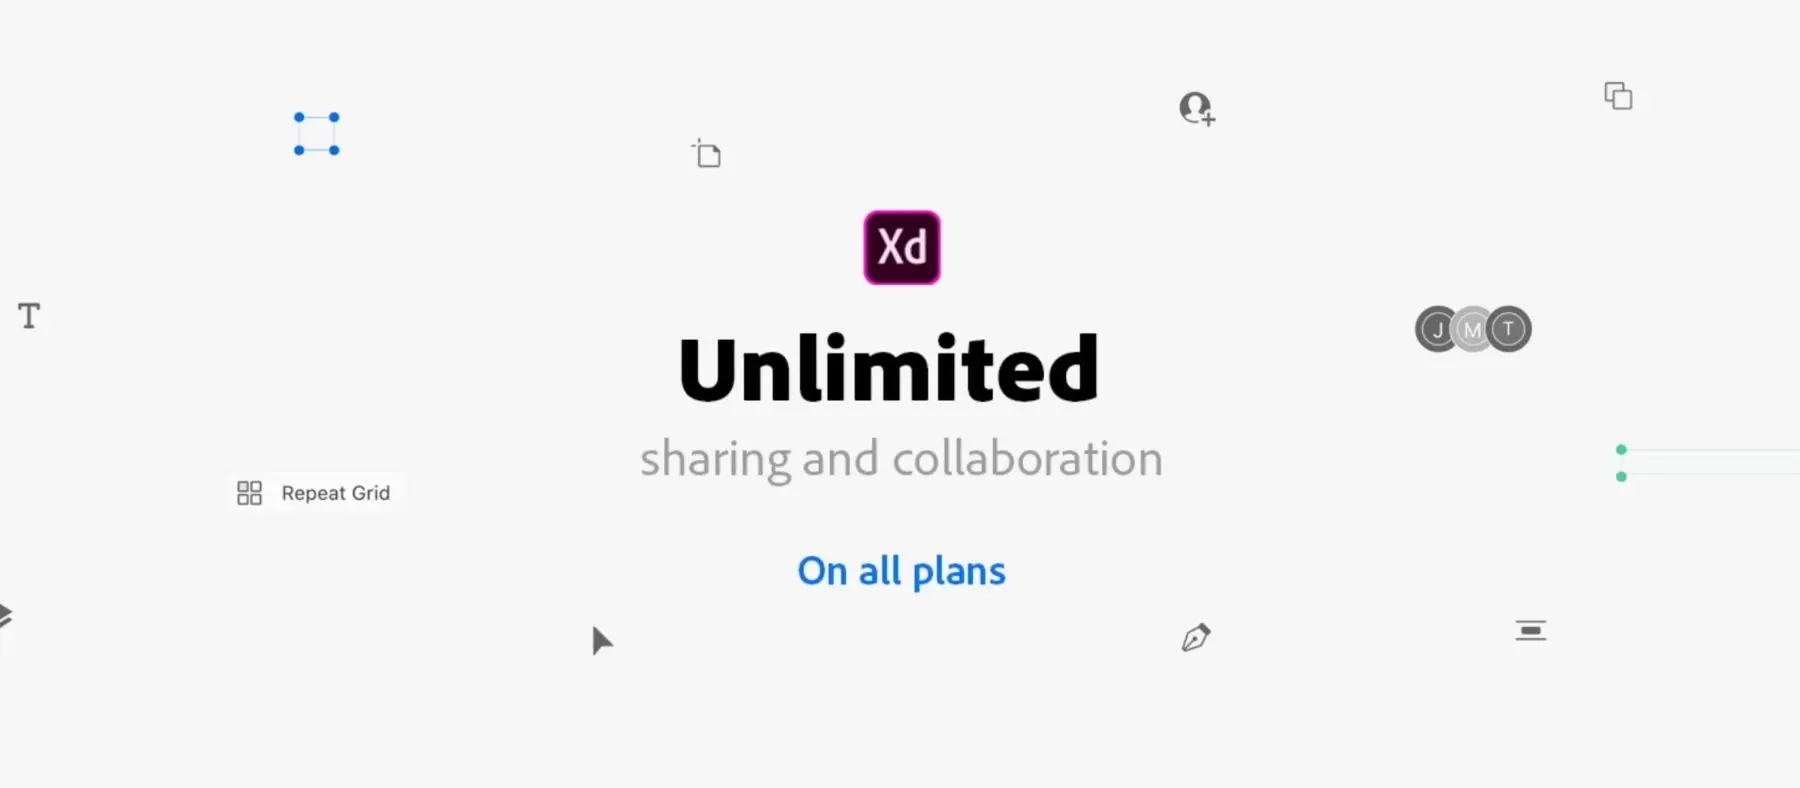 Banner for the Adobe XD announcement offering unlimited sharing and collaboration on all XD subscription plans.